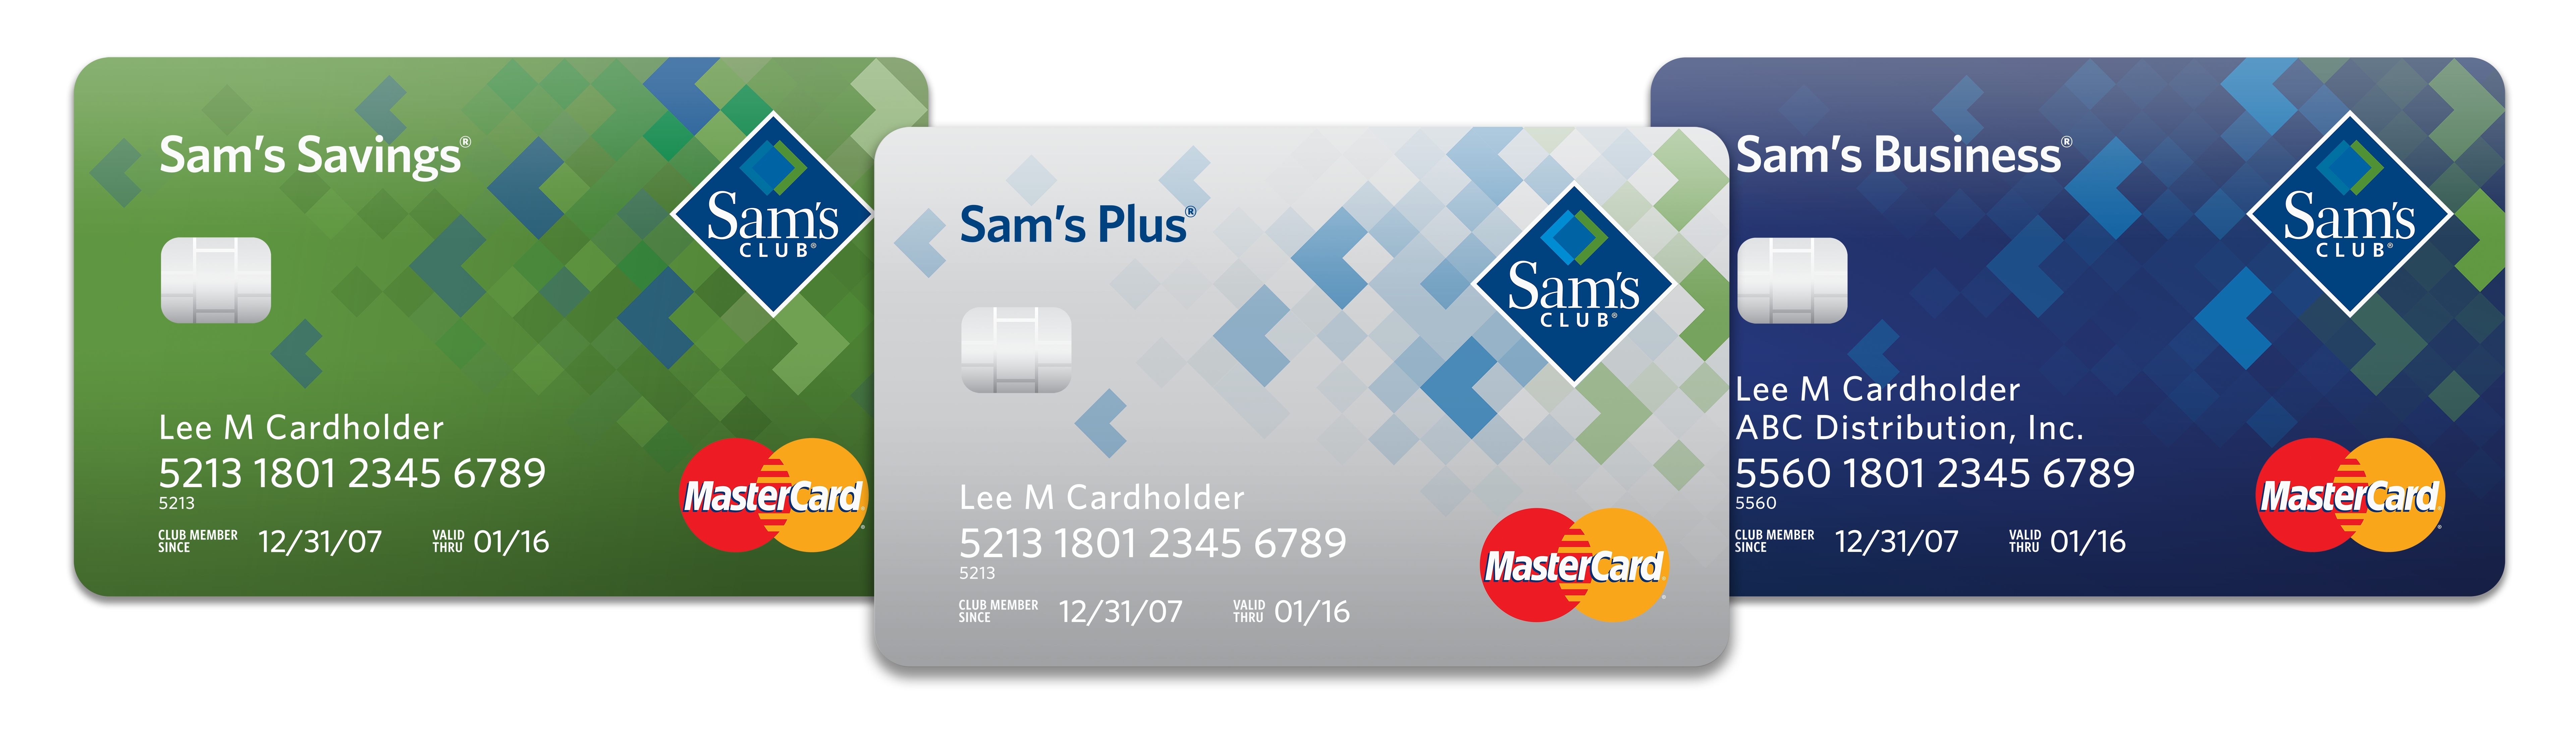 Synchrony To Continue Providing Sam's Club Credit Cards After Accord Is Reached With Walmart